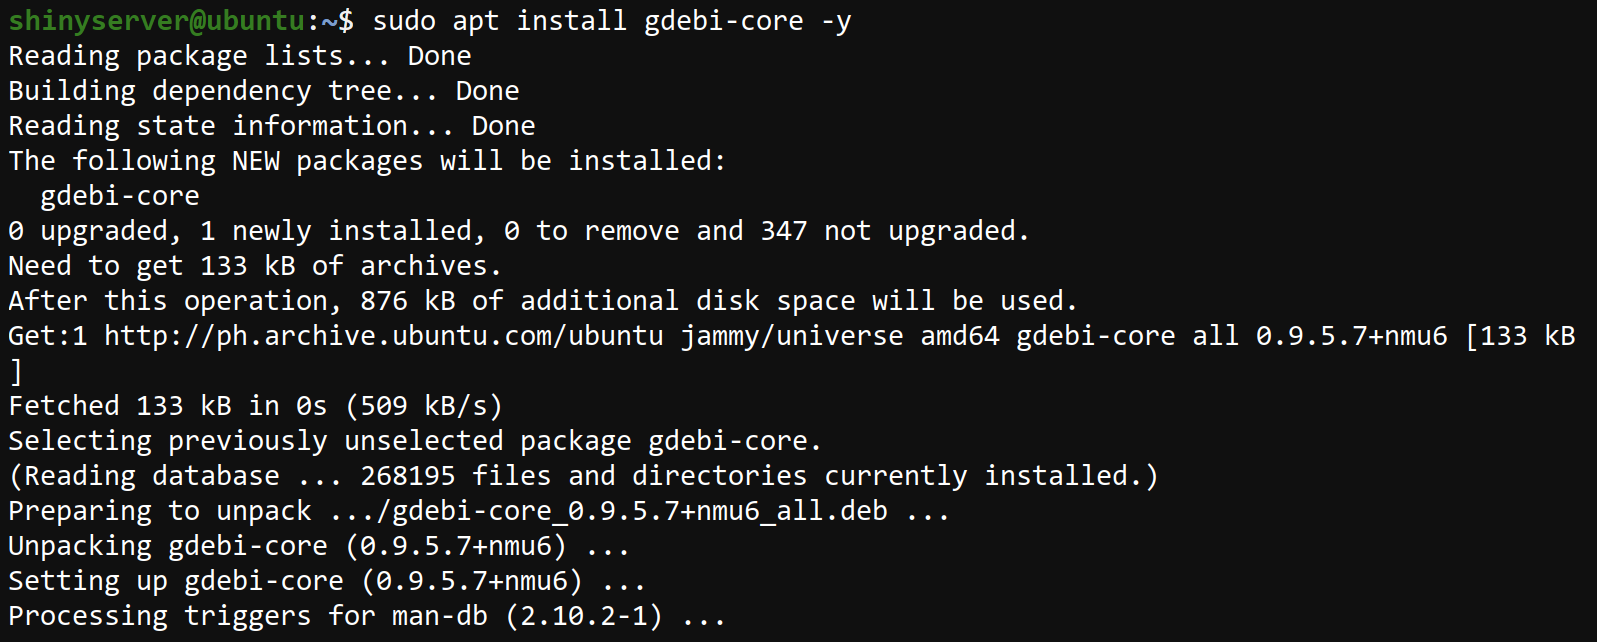 Installing the gdebi-core package